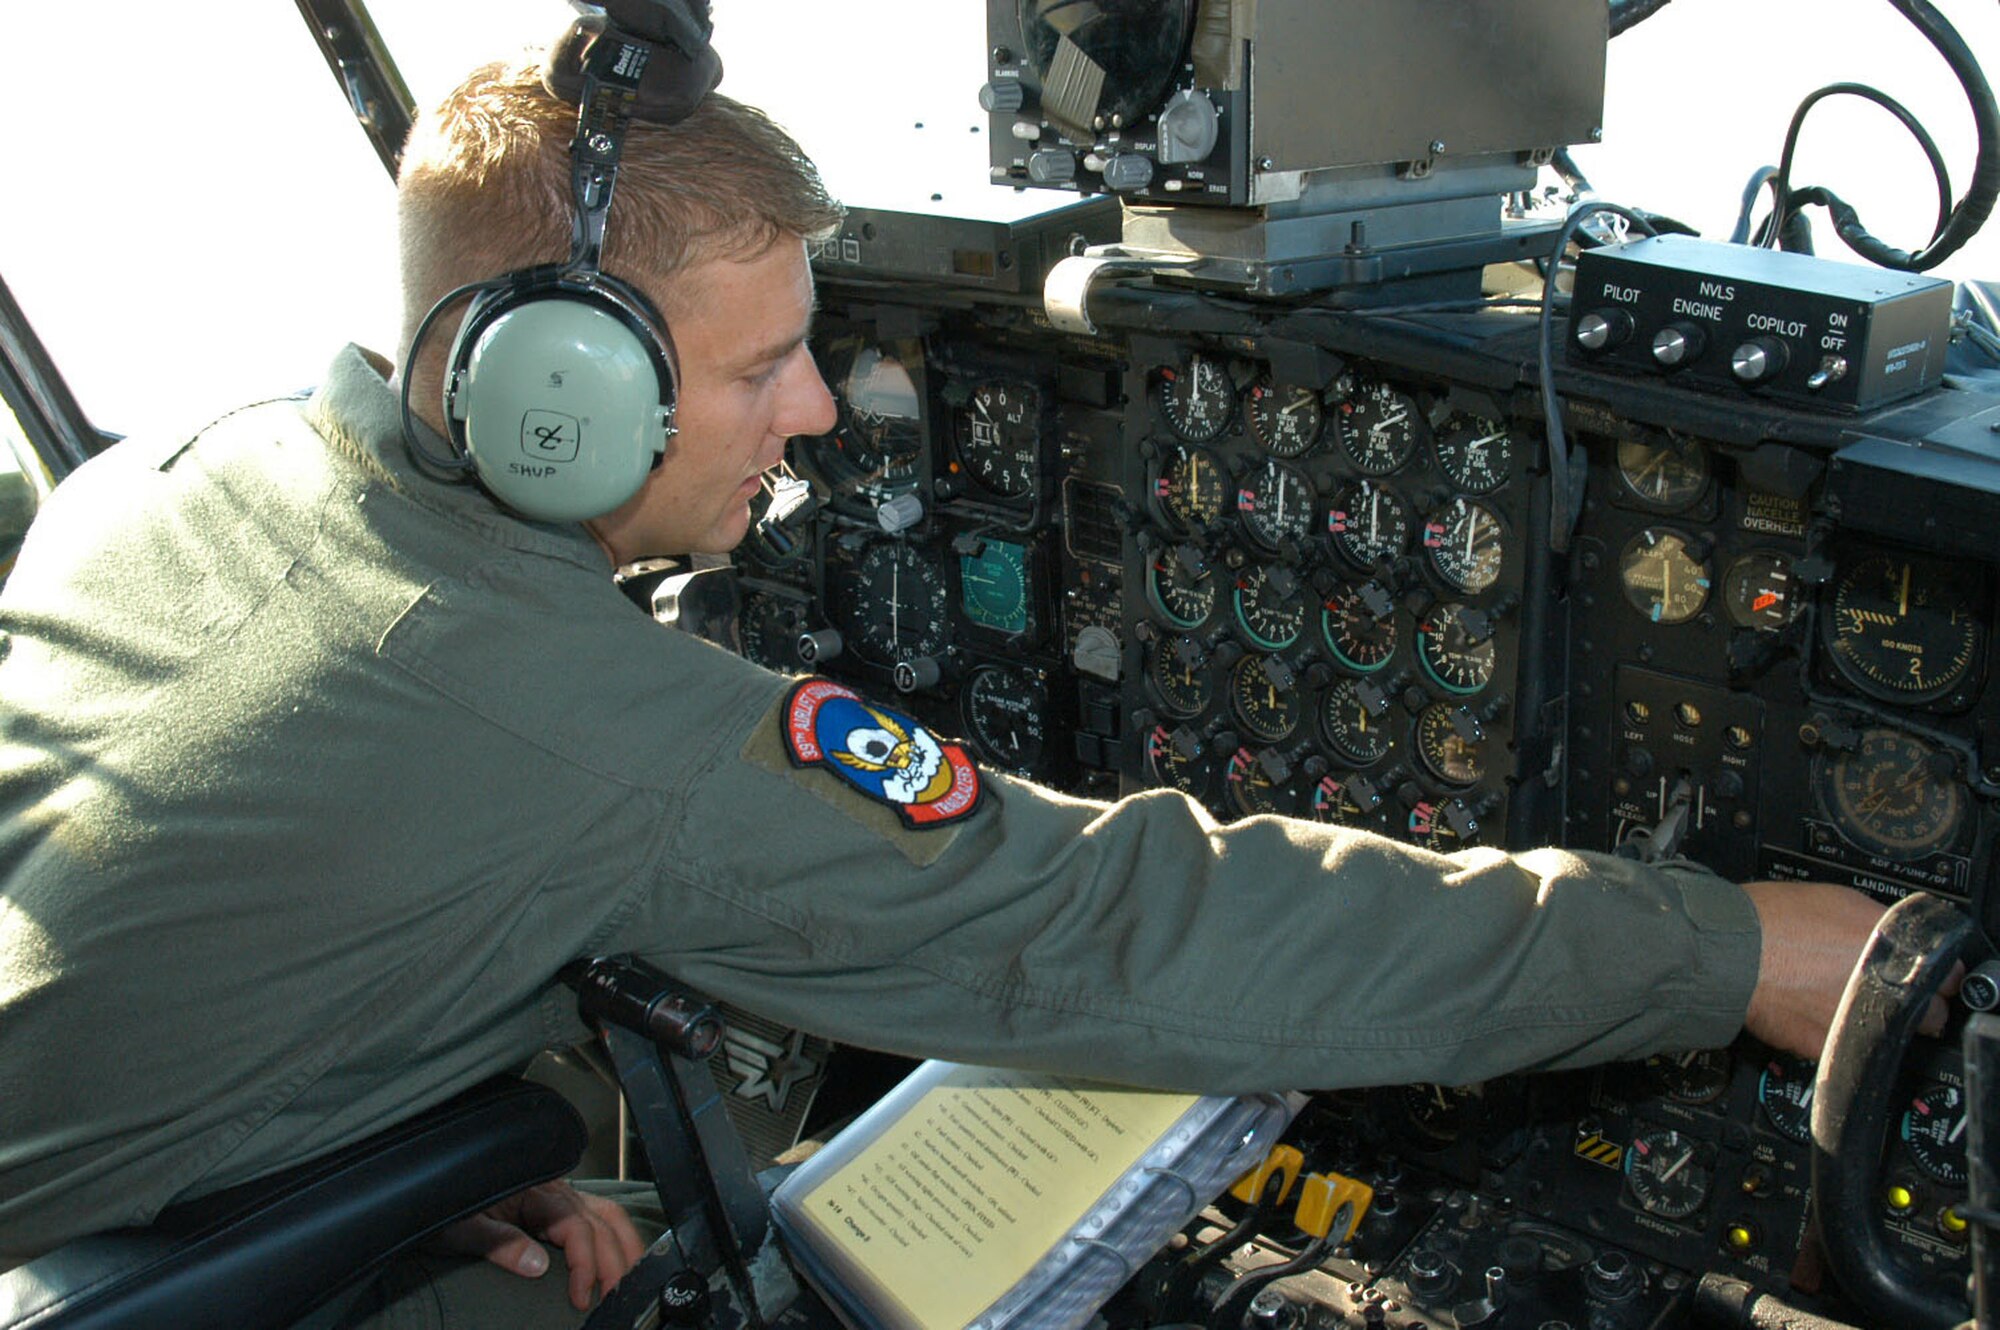 Staff Sgt. Shannon Shuping, 317th AG flight engineer, performs pre-flight checks in the cockpit.